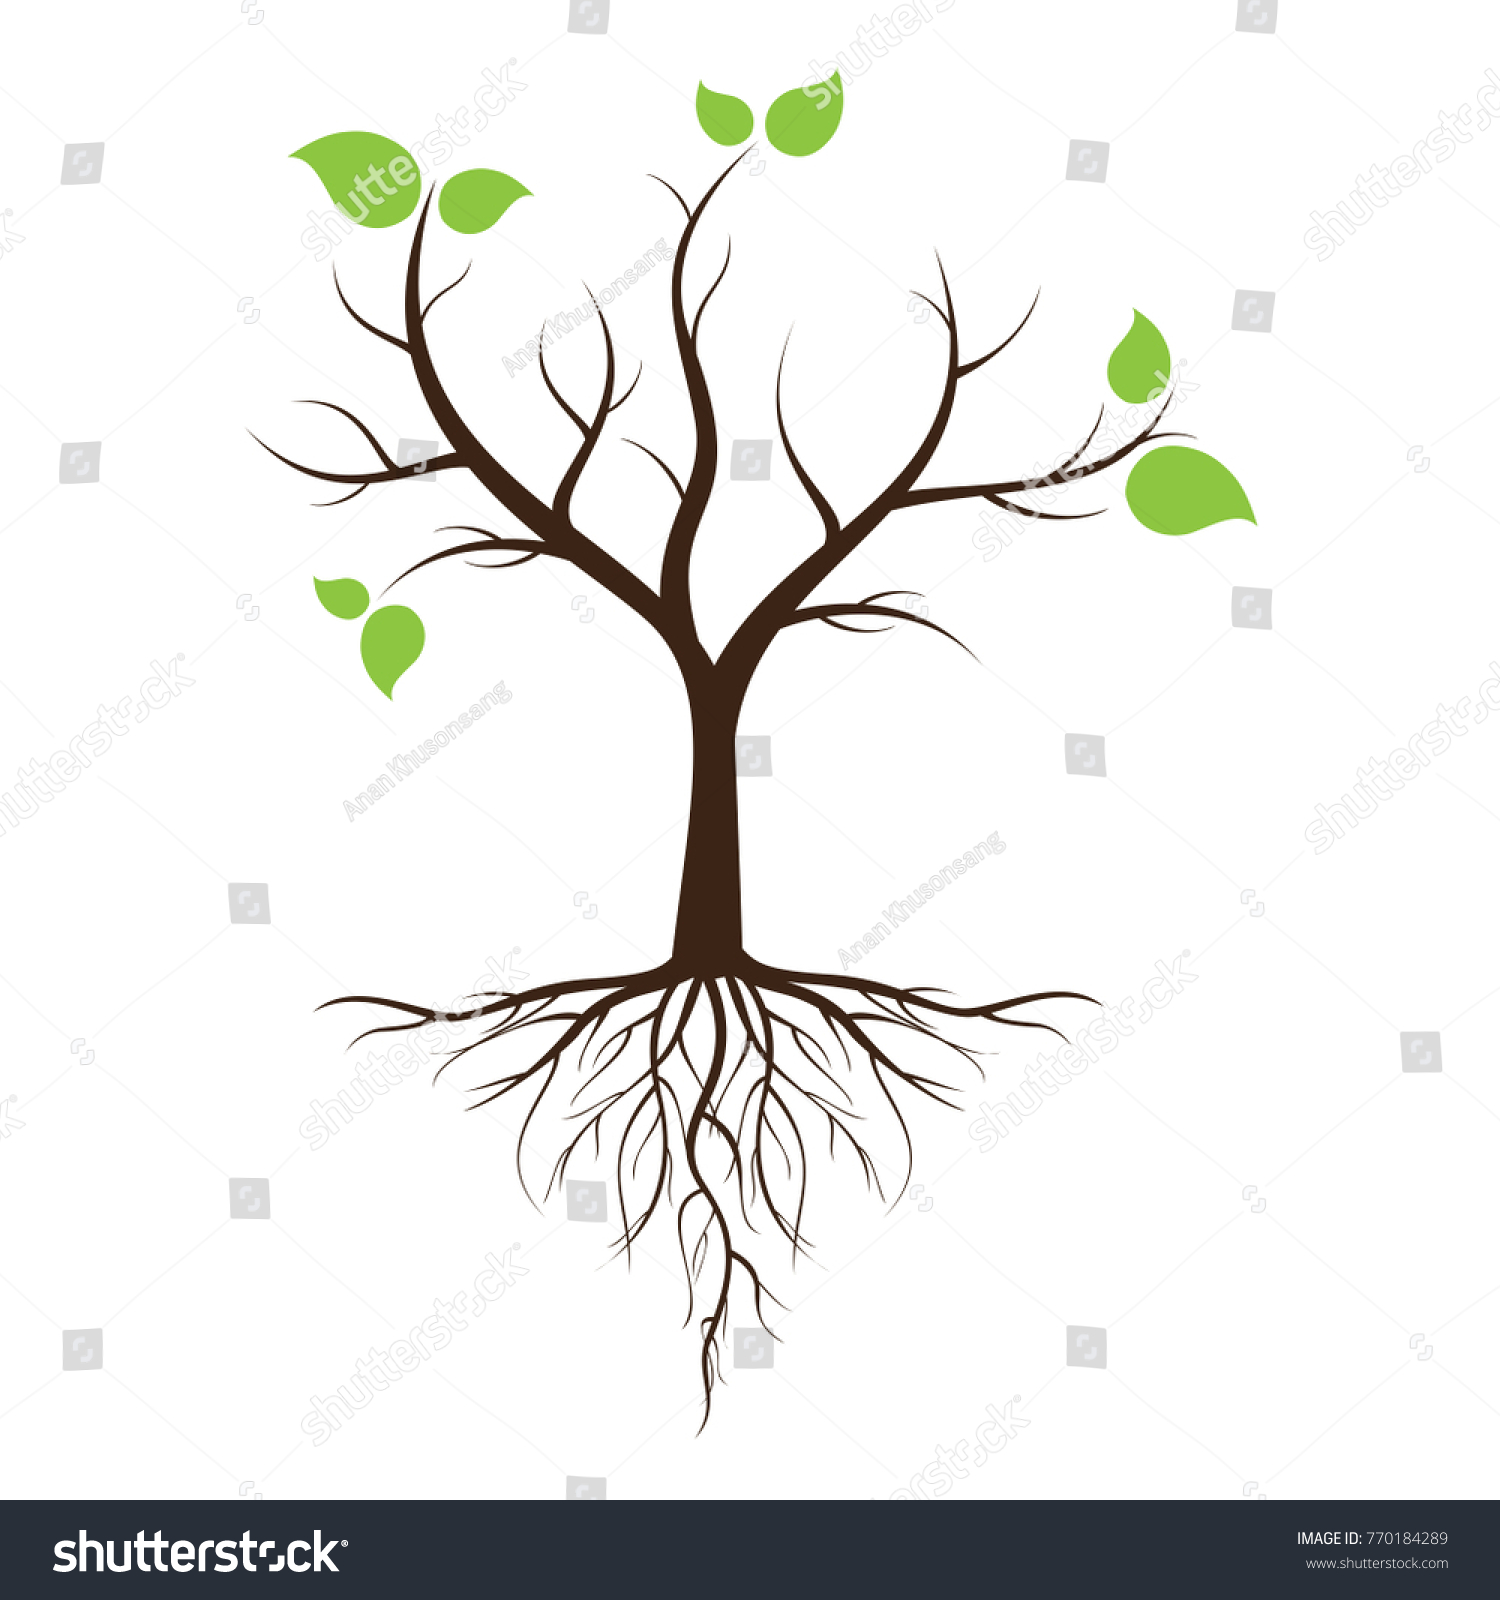 SVG of Green leafy tree with roots With trees isolated from white background. svg